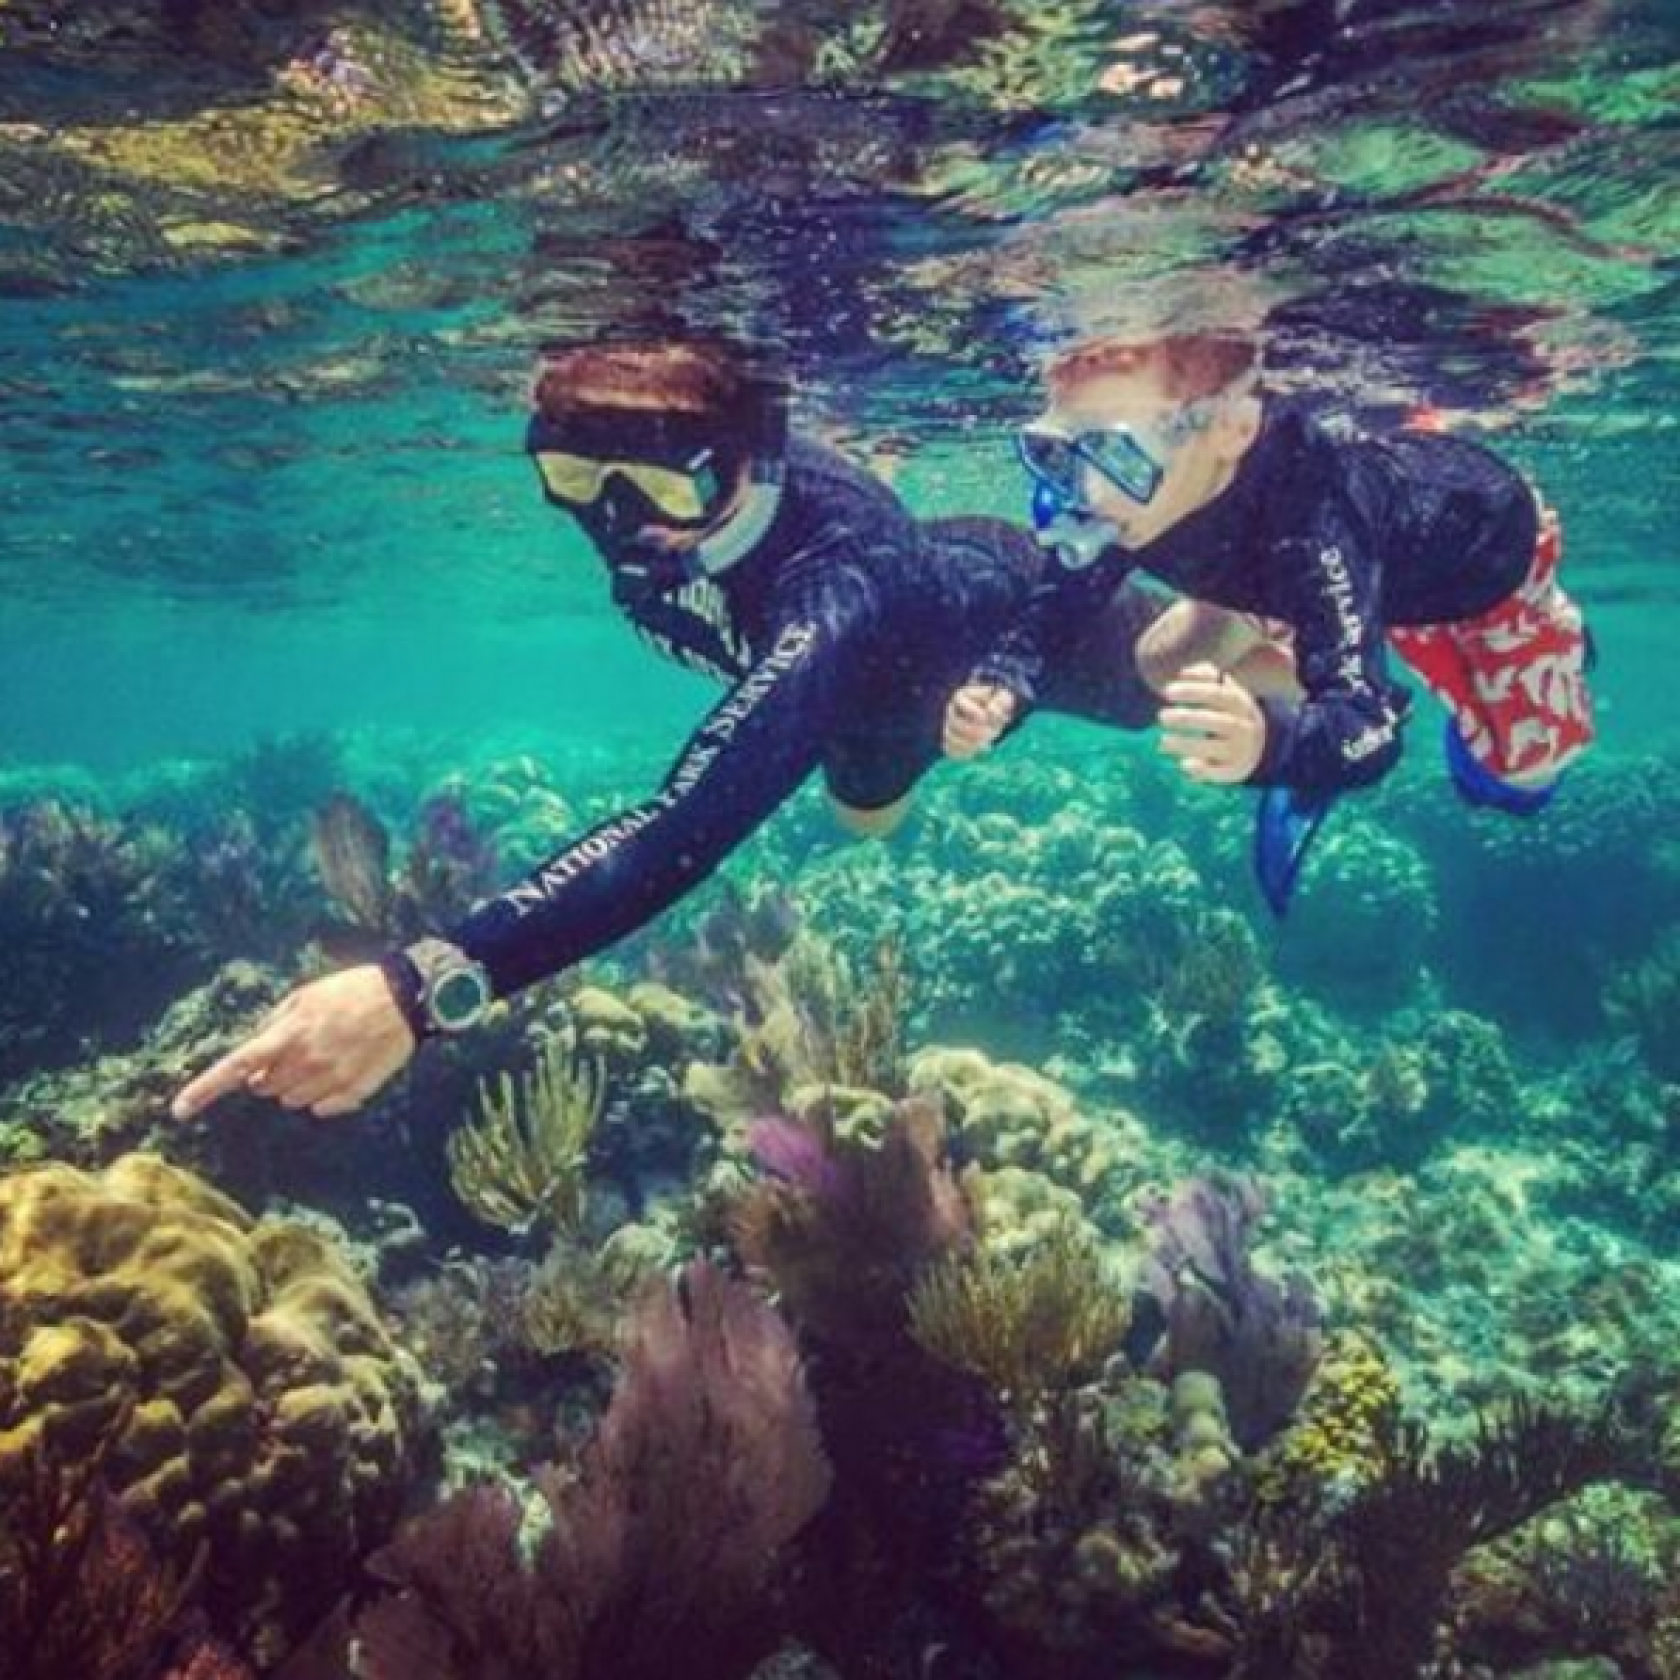 Two national park rangers point at fish and coral while scuba diving